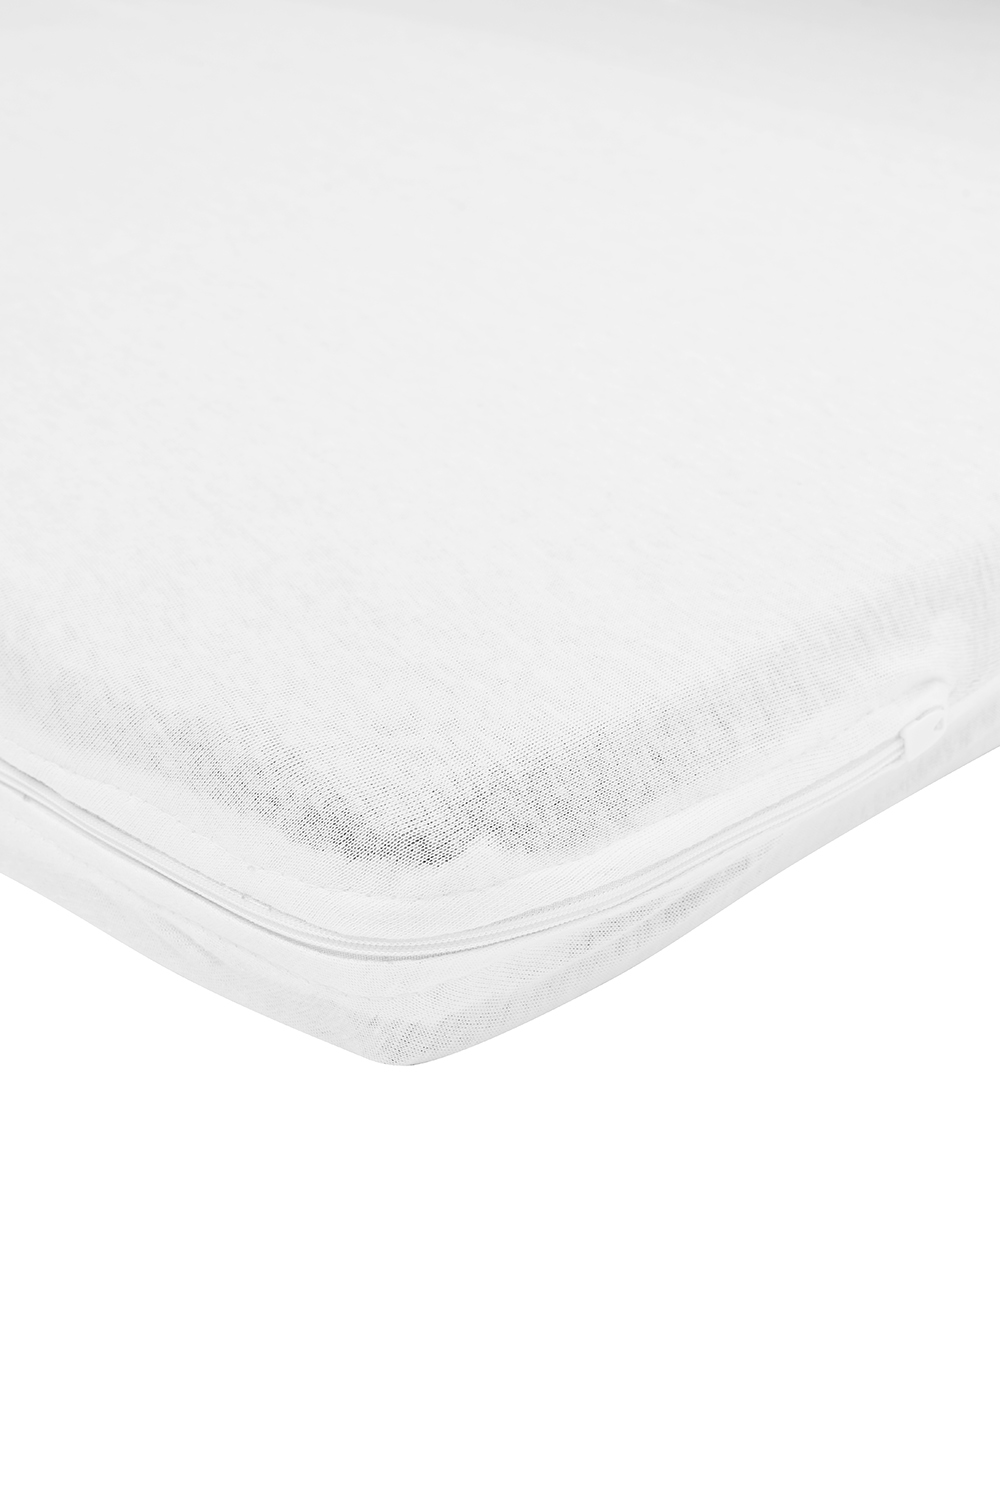 Jersey Campingbed Mattress Cover - White - 60X120cm